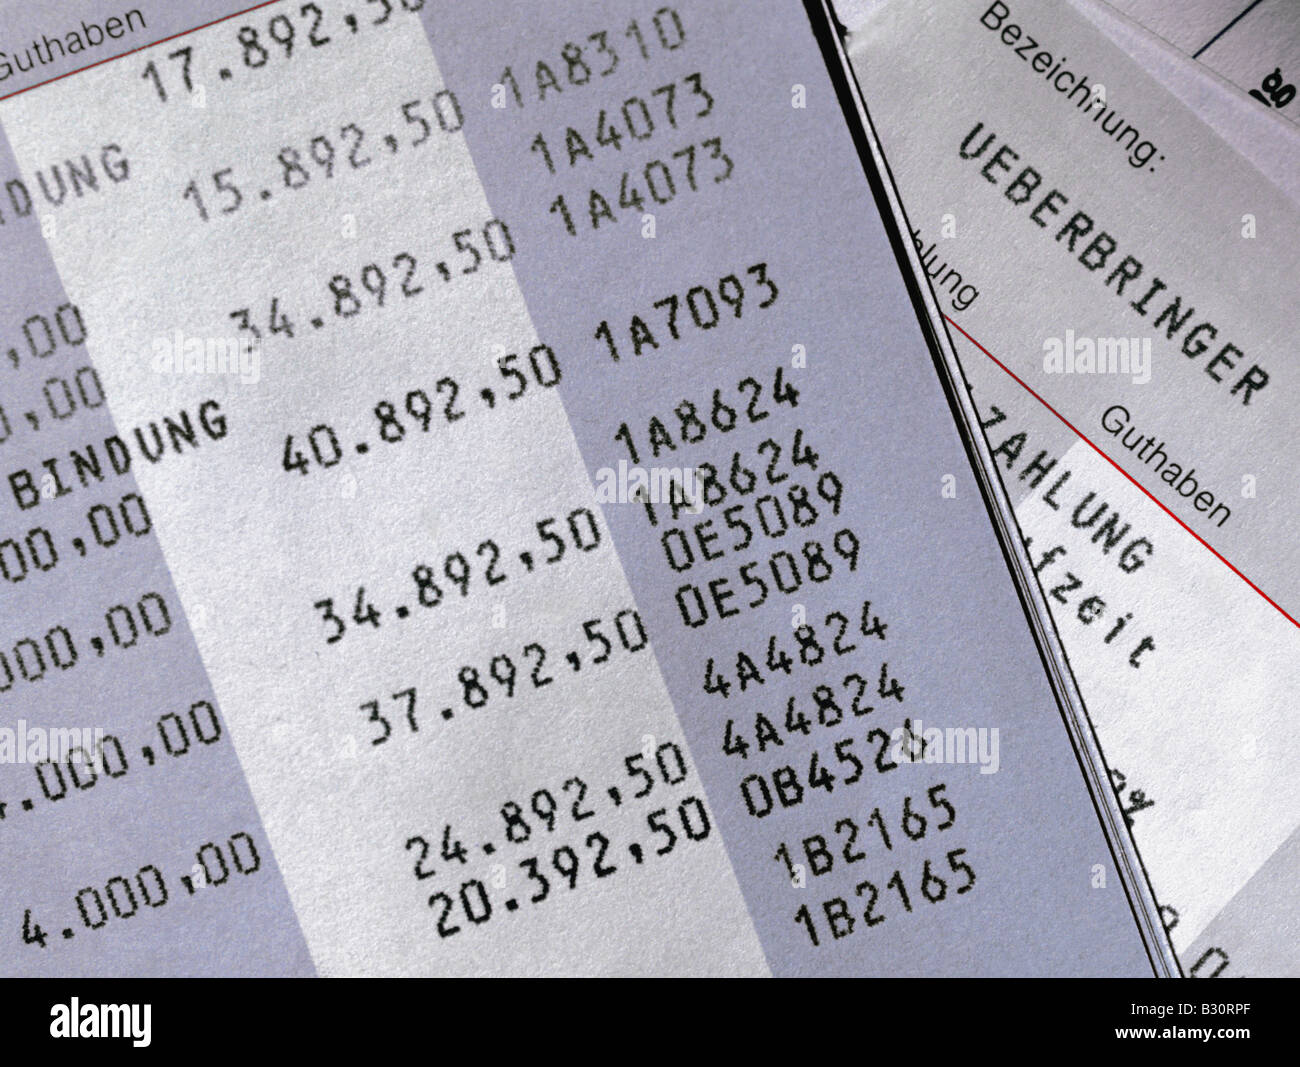 Accounting lines passbook Stock Photo